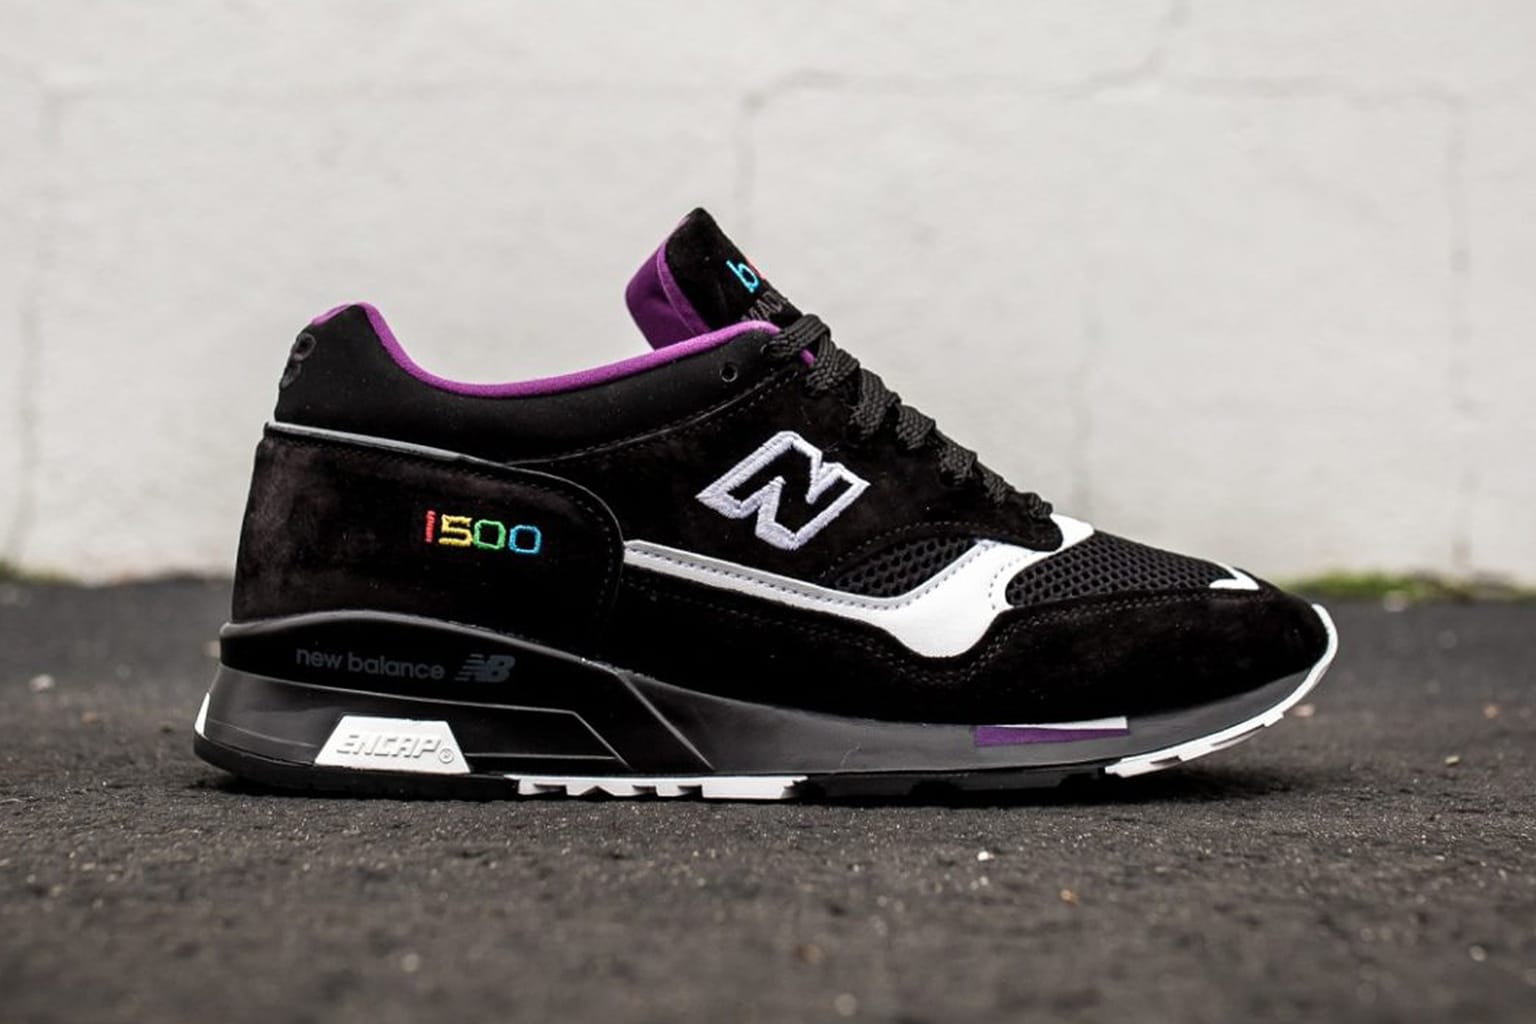 new balance color prisma made in uk 1500